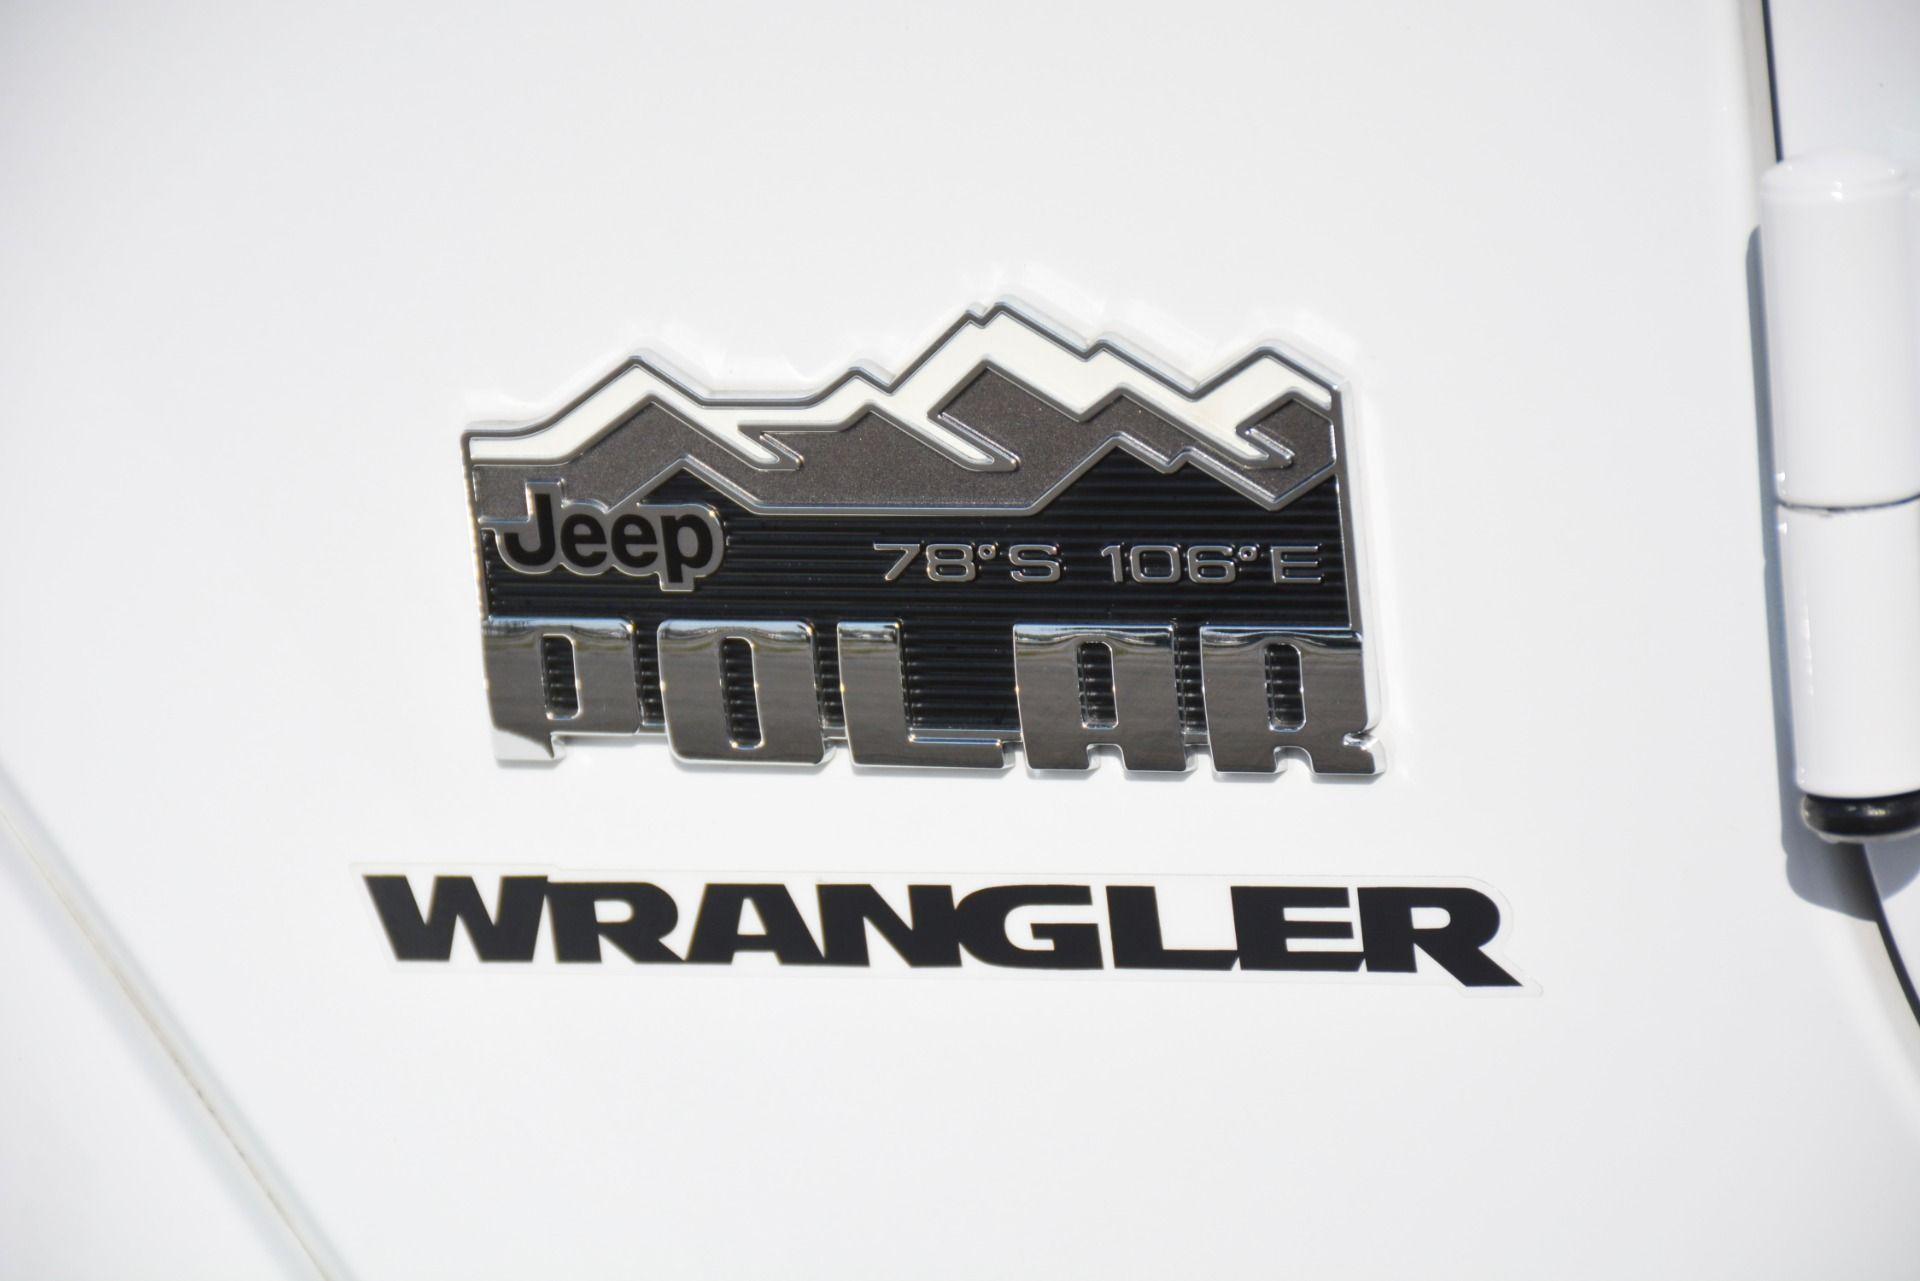 Jeep Wrangler Unlimited Logo - Used 2014 Jeep Wrangler Unlimited Polar Edition For Sale ($37,900 ...